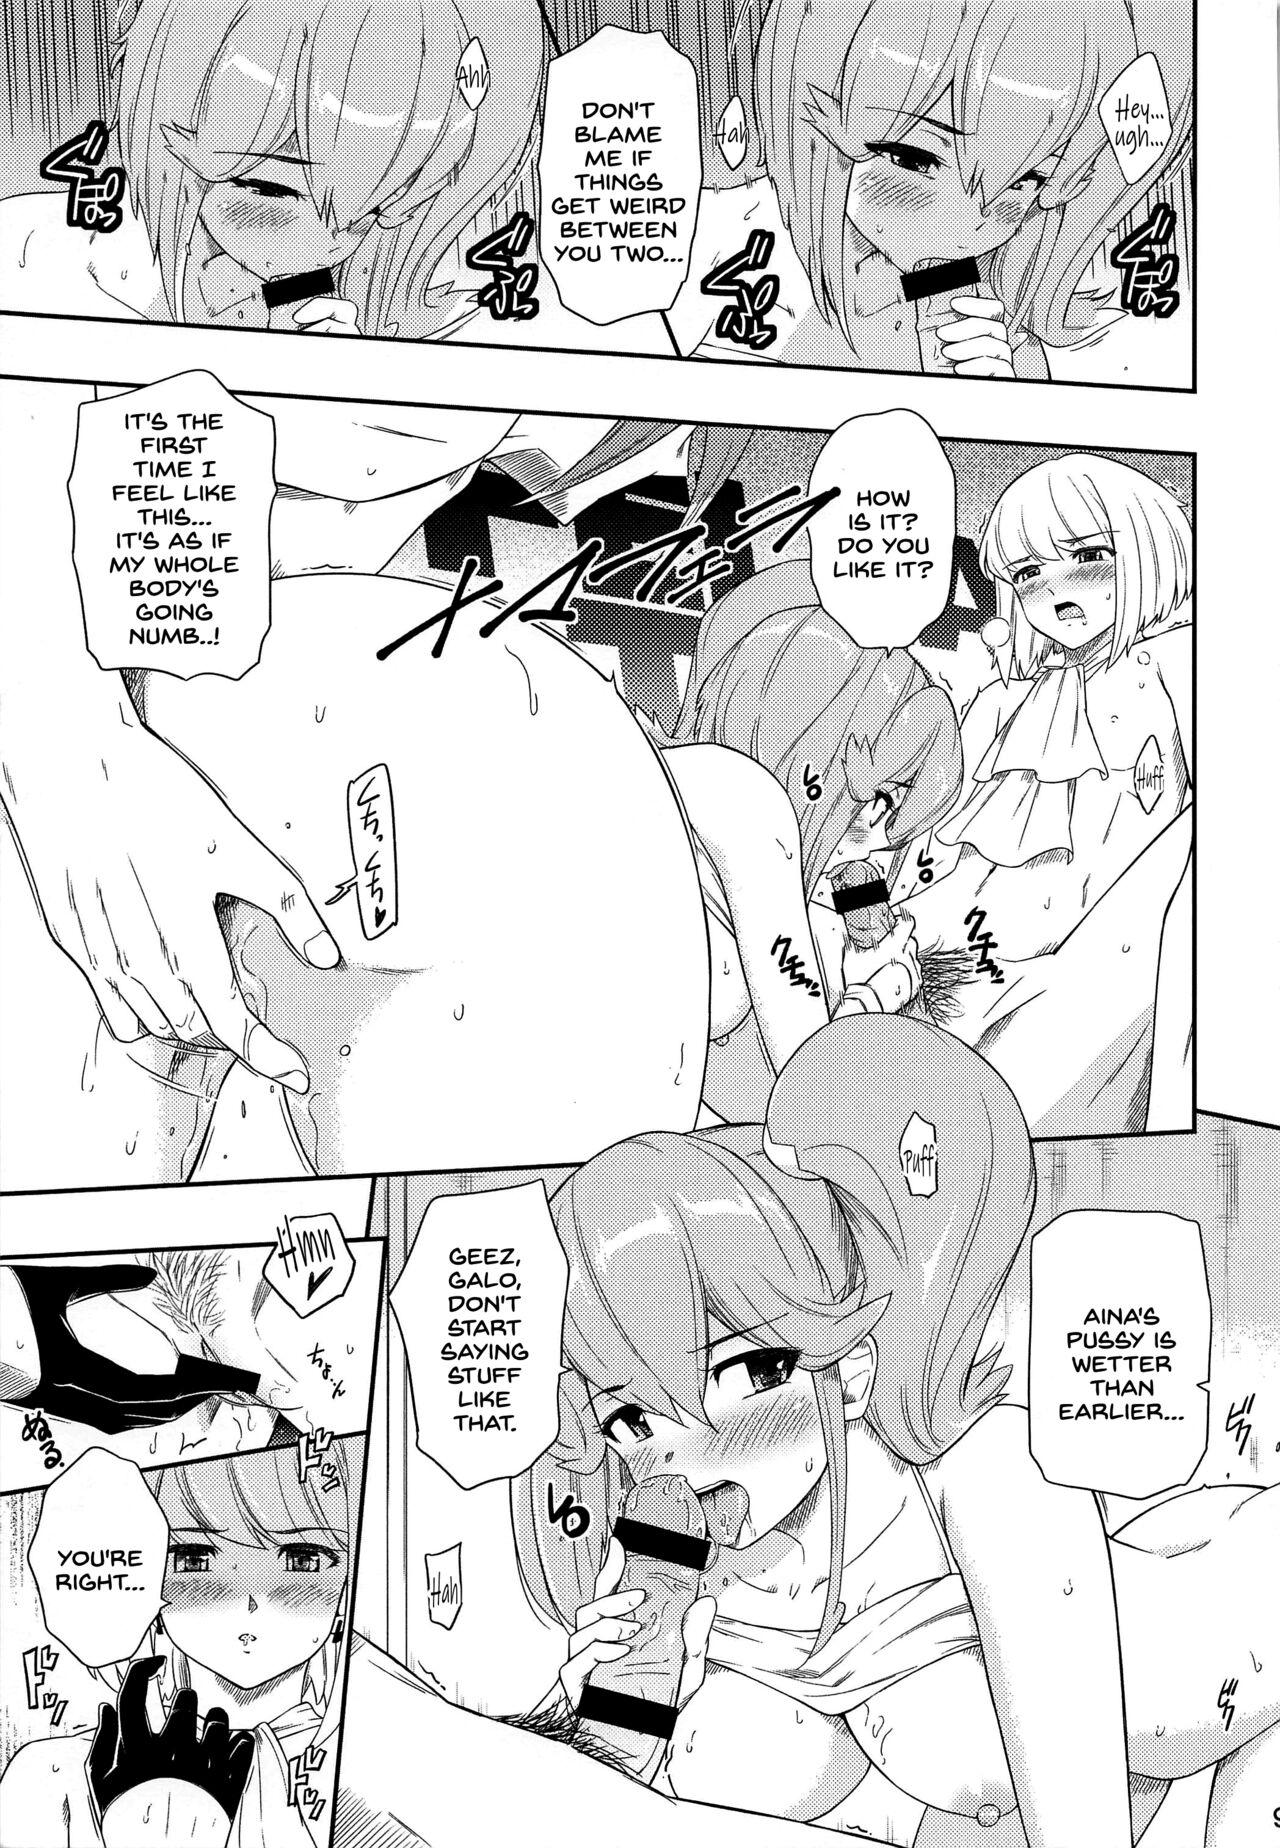 Japanese EROMARE - Suddenly 3P sex is happening... Gorgeous - Page 8